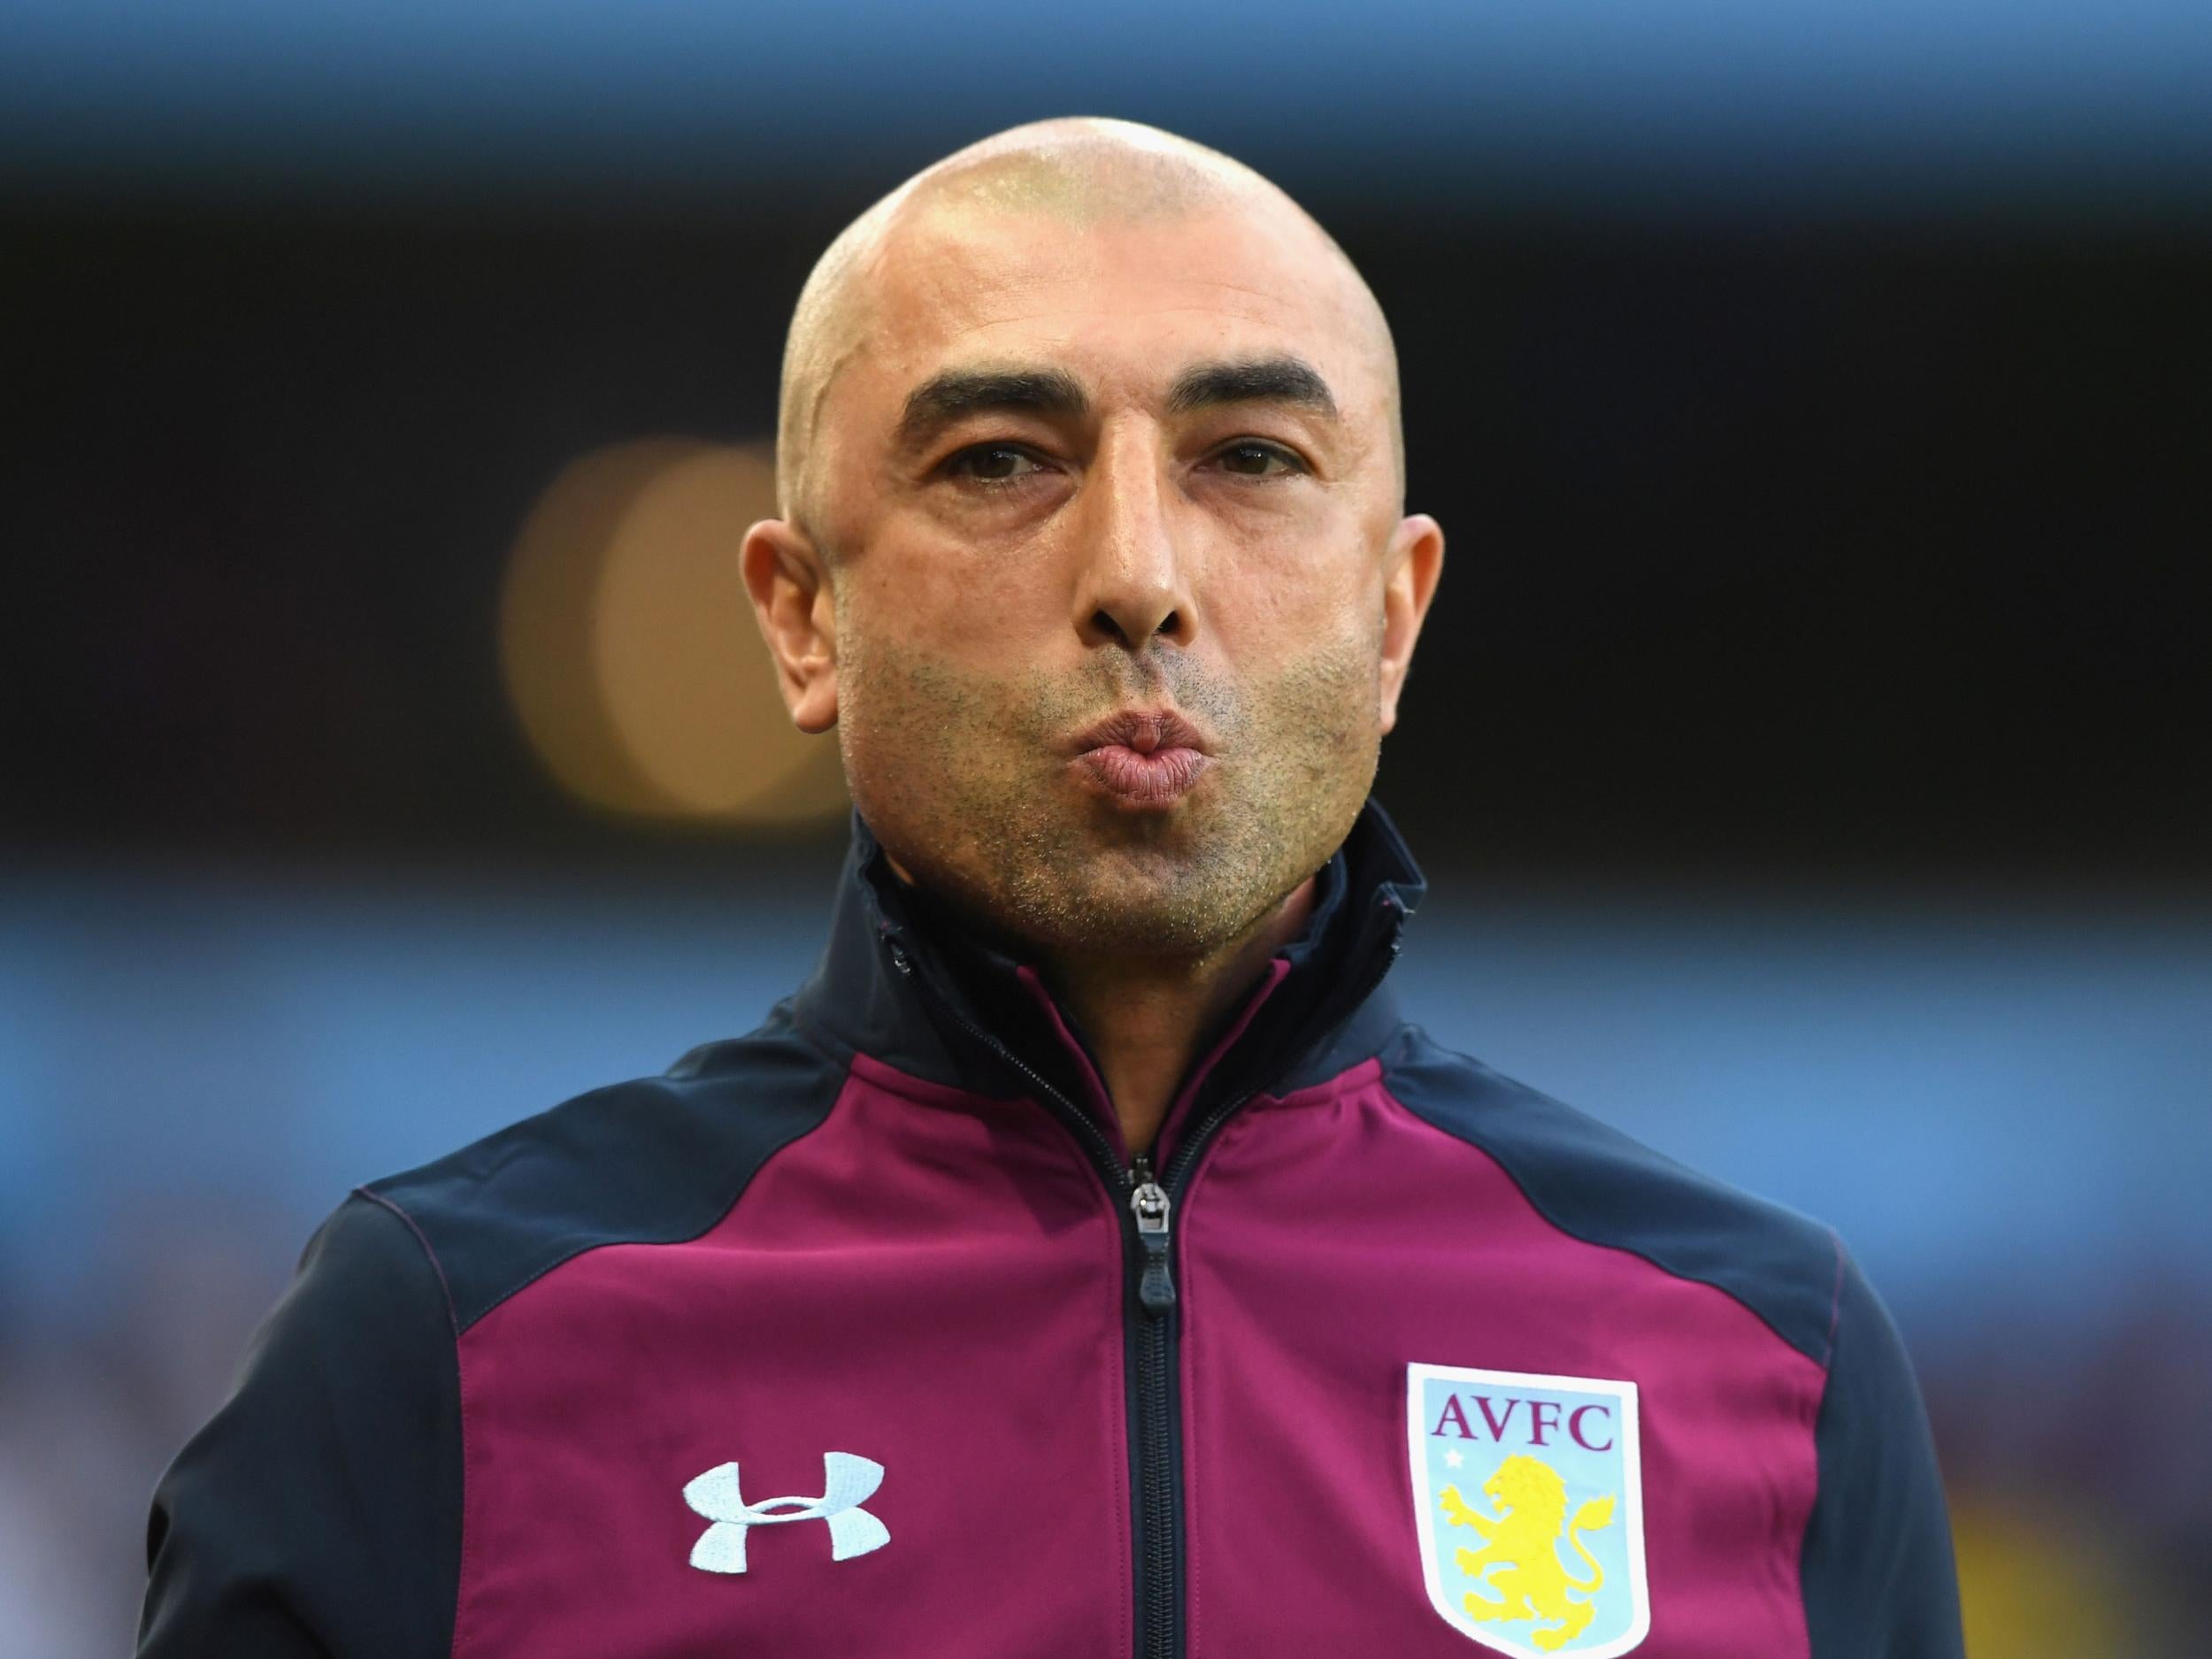 Di Matteo was shown the door on Monday